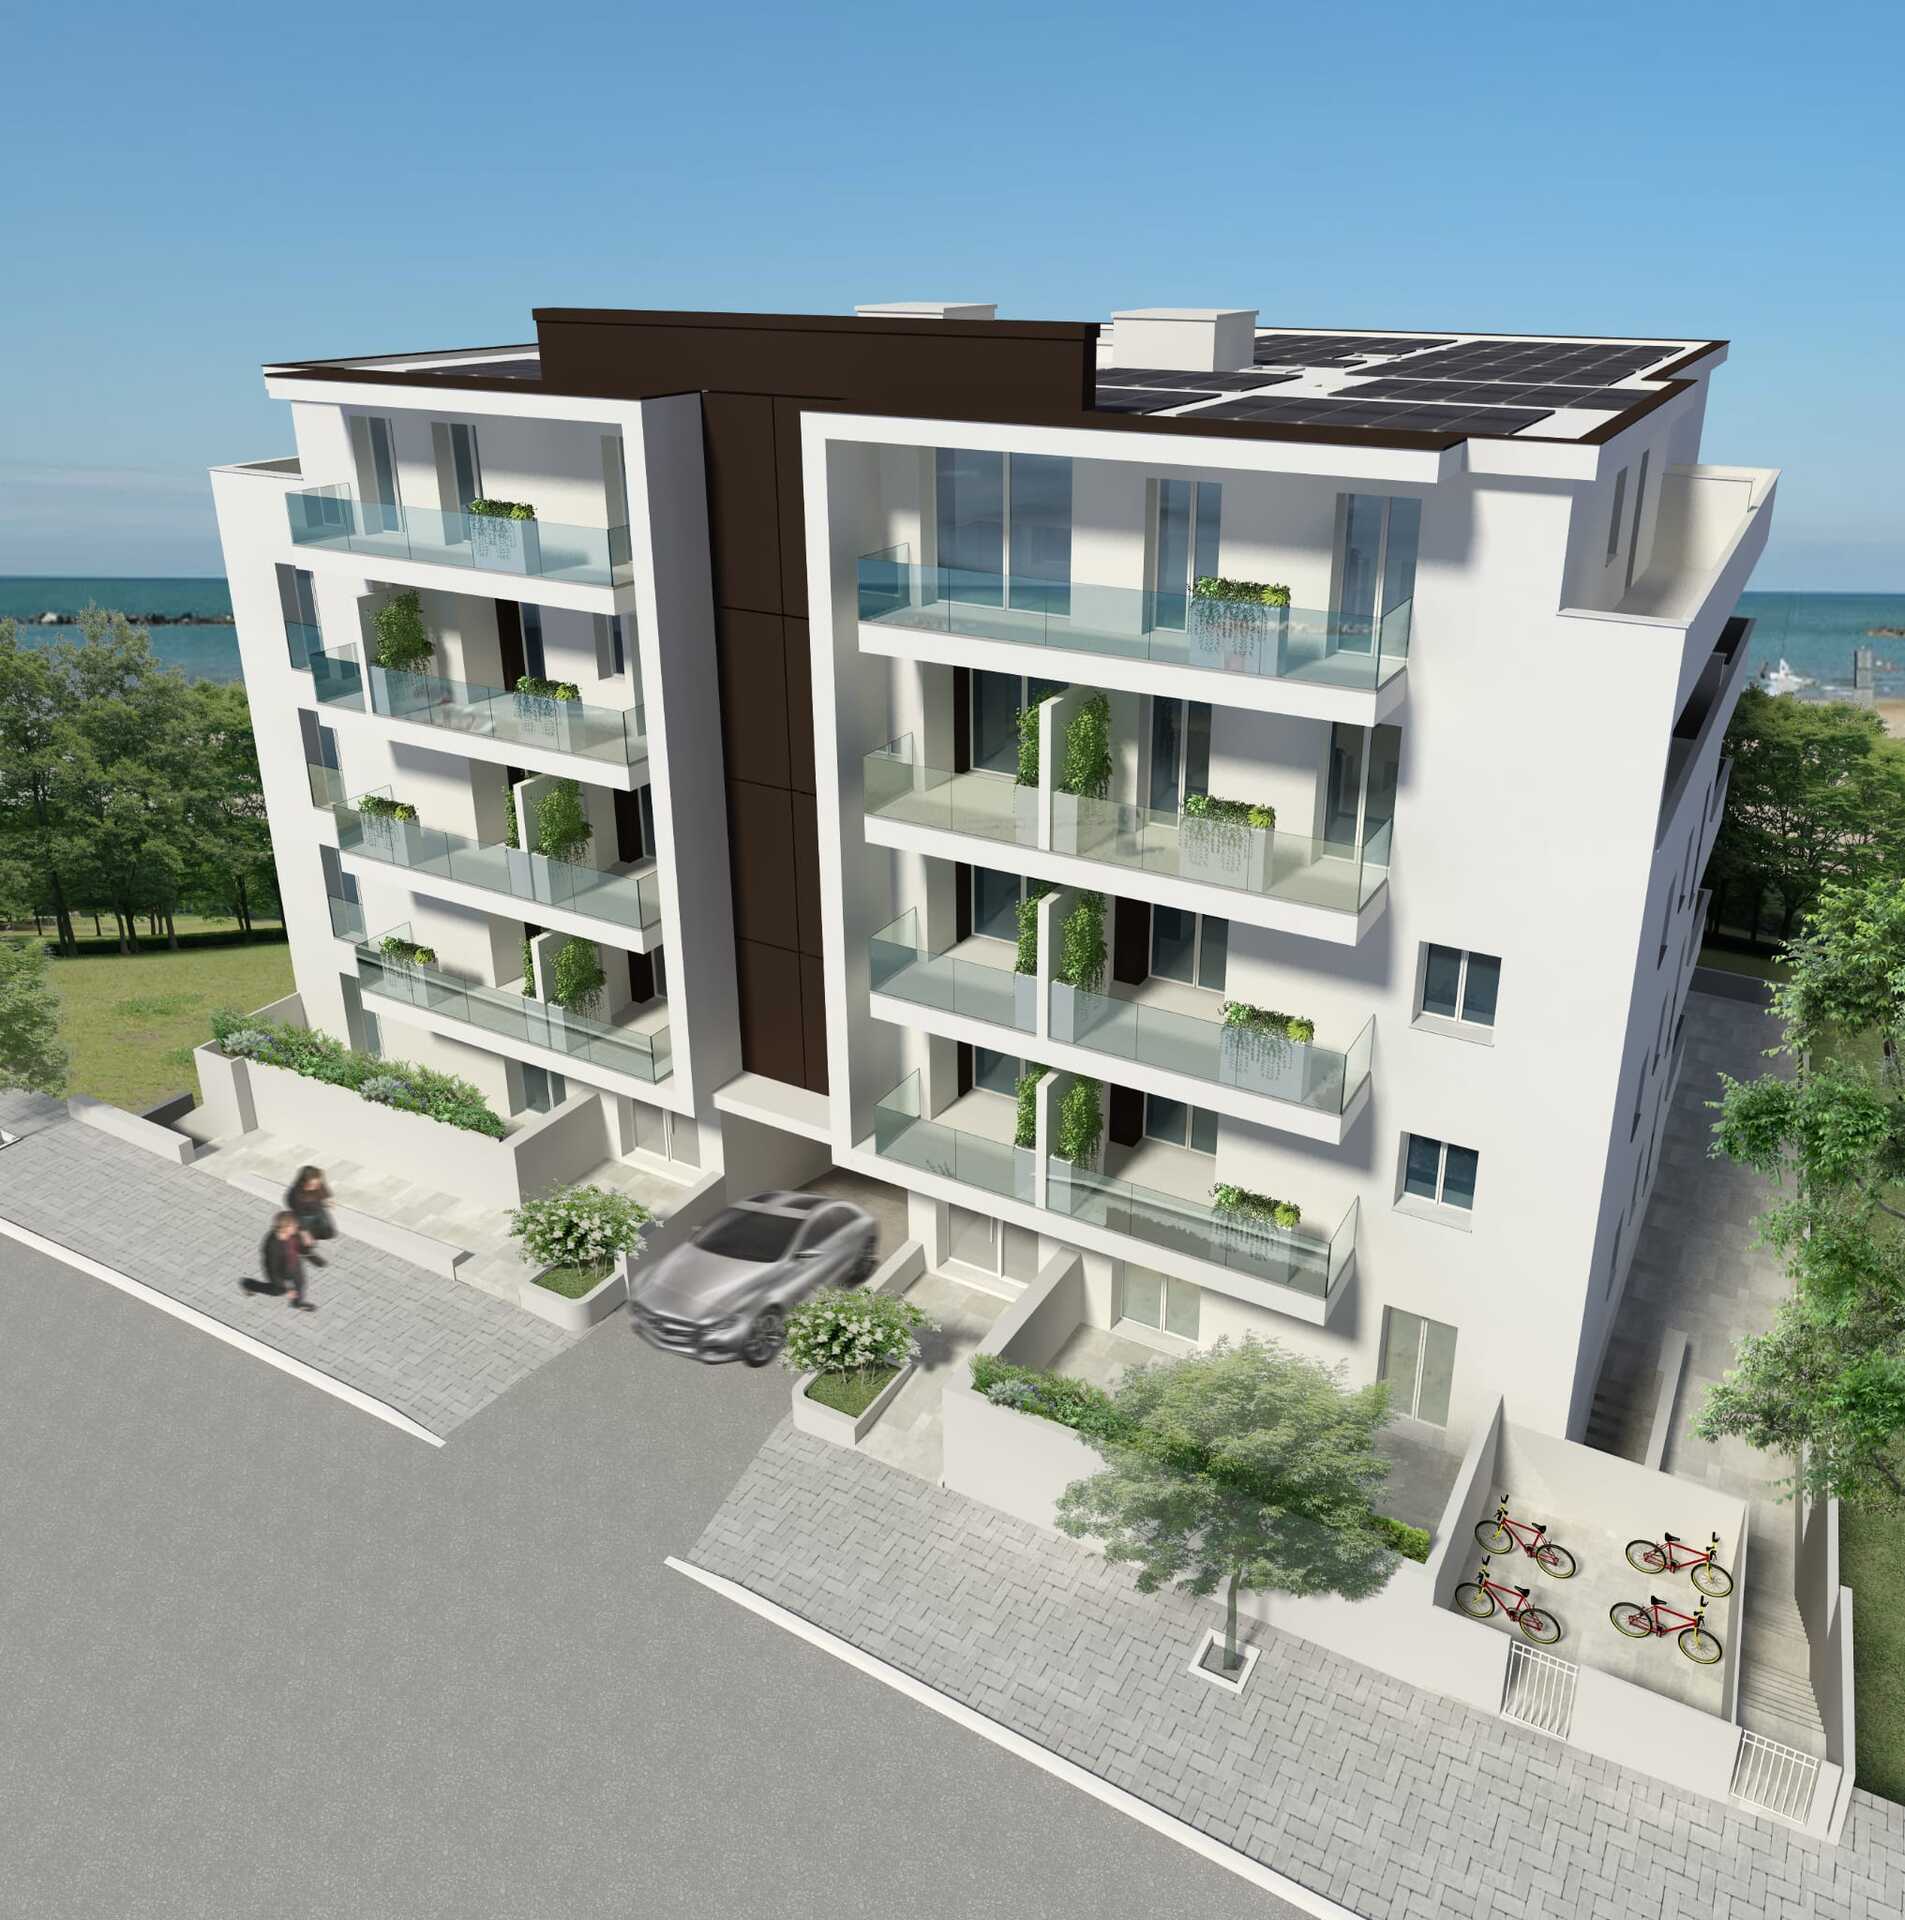 For sale penthouse in city Pesaro Marche